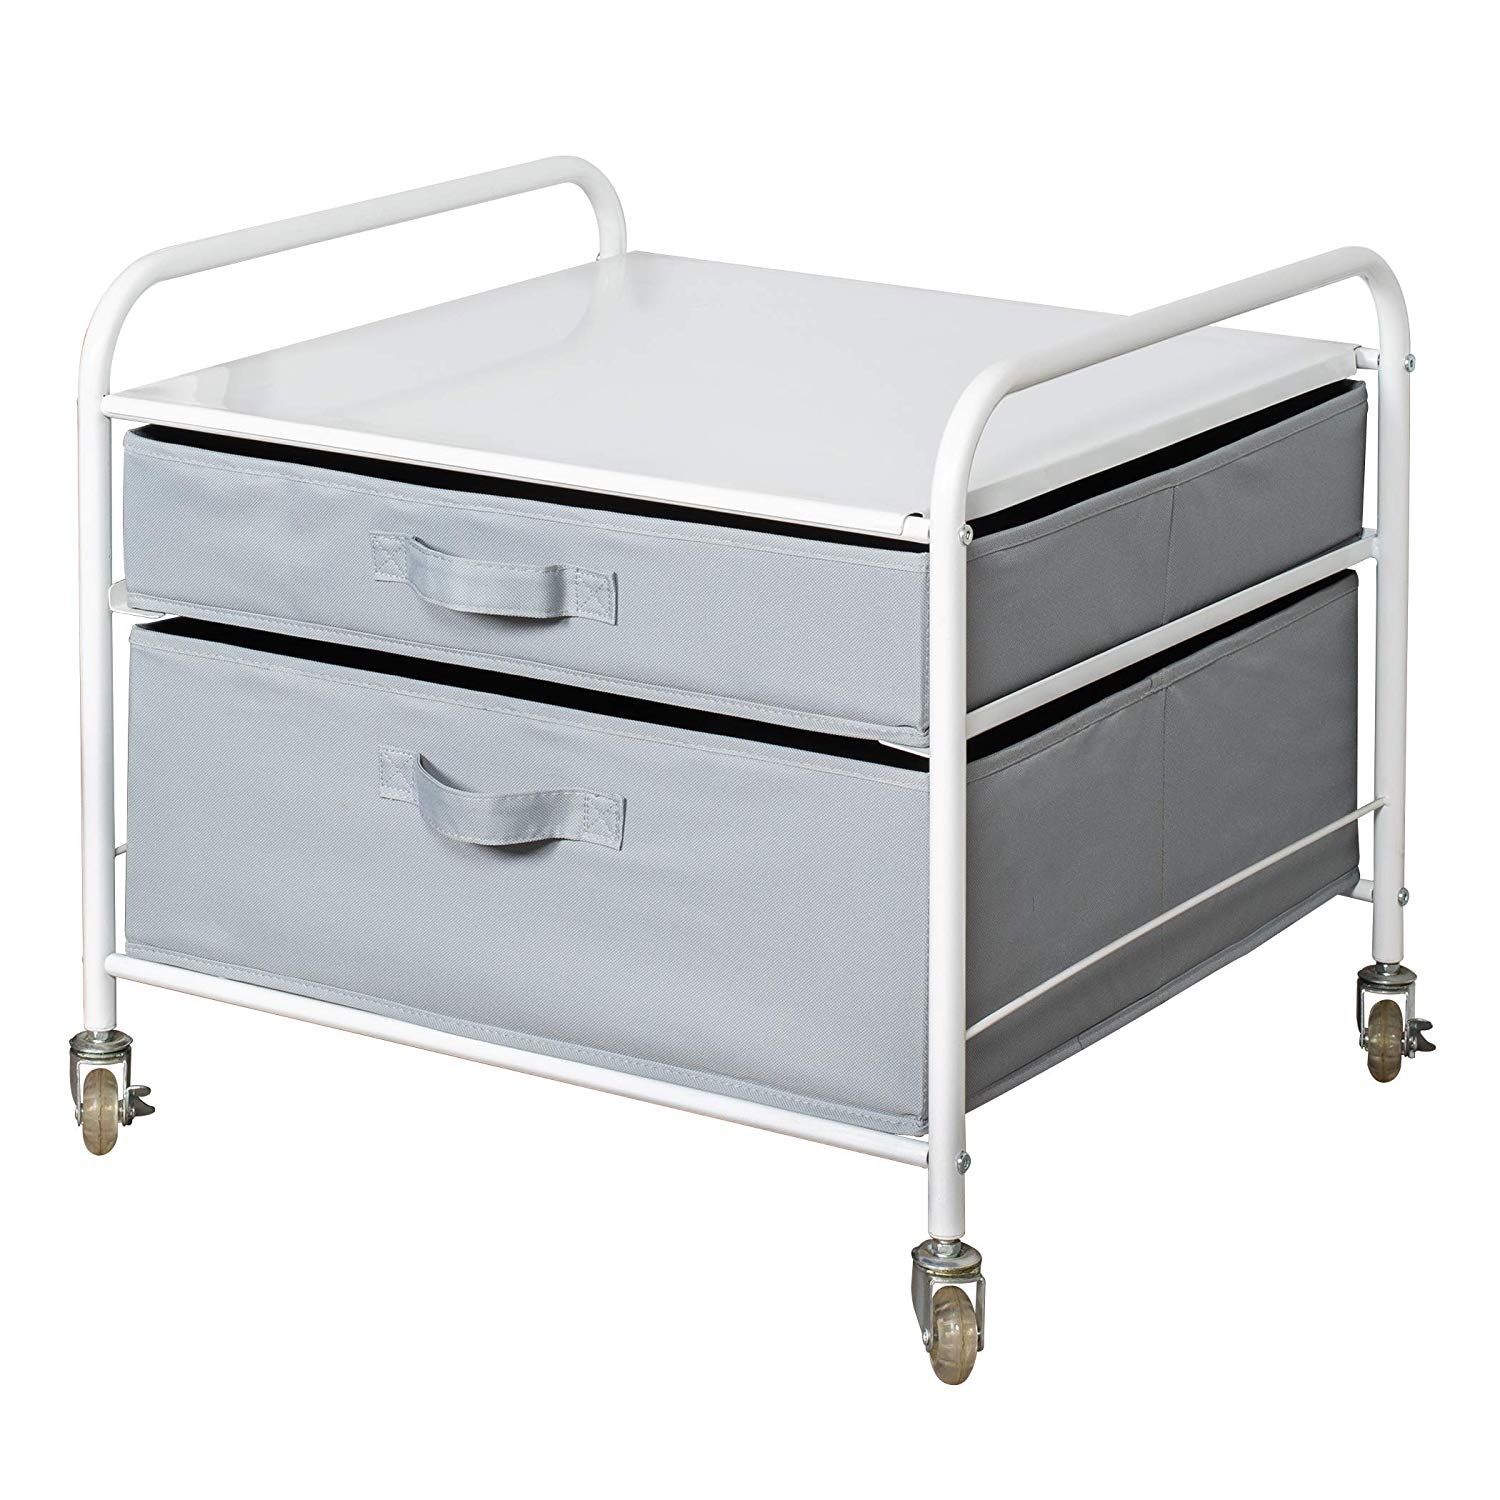 Fridge Stand Supreme 2 Drawer Storage Chest Byourbed Color: White/Light Gray